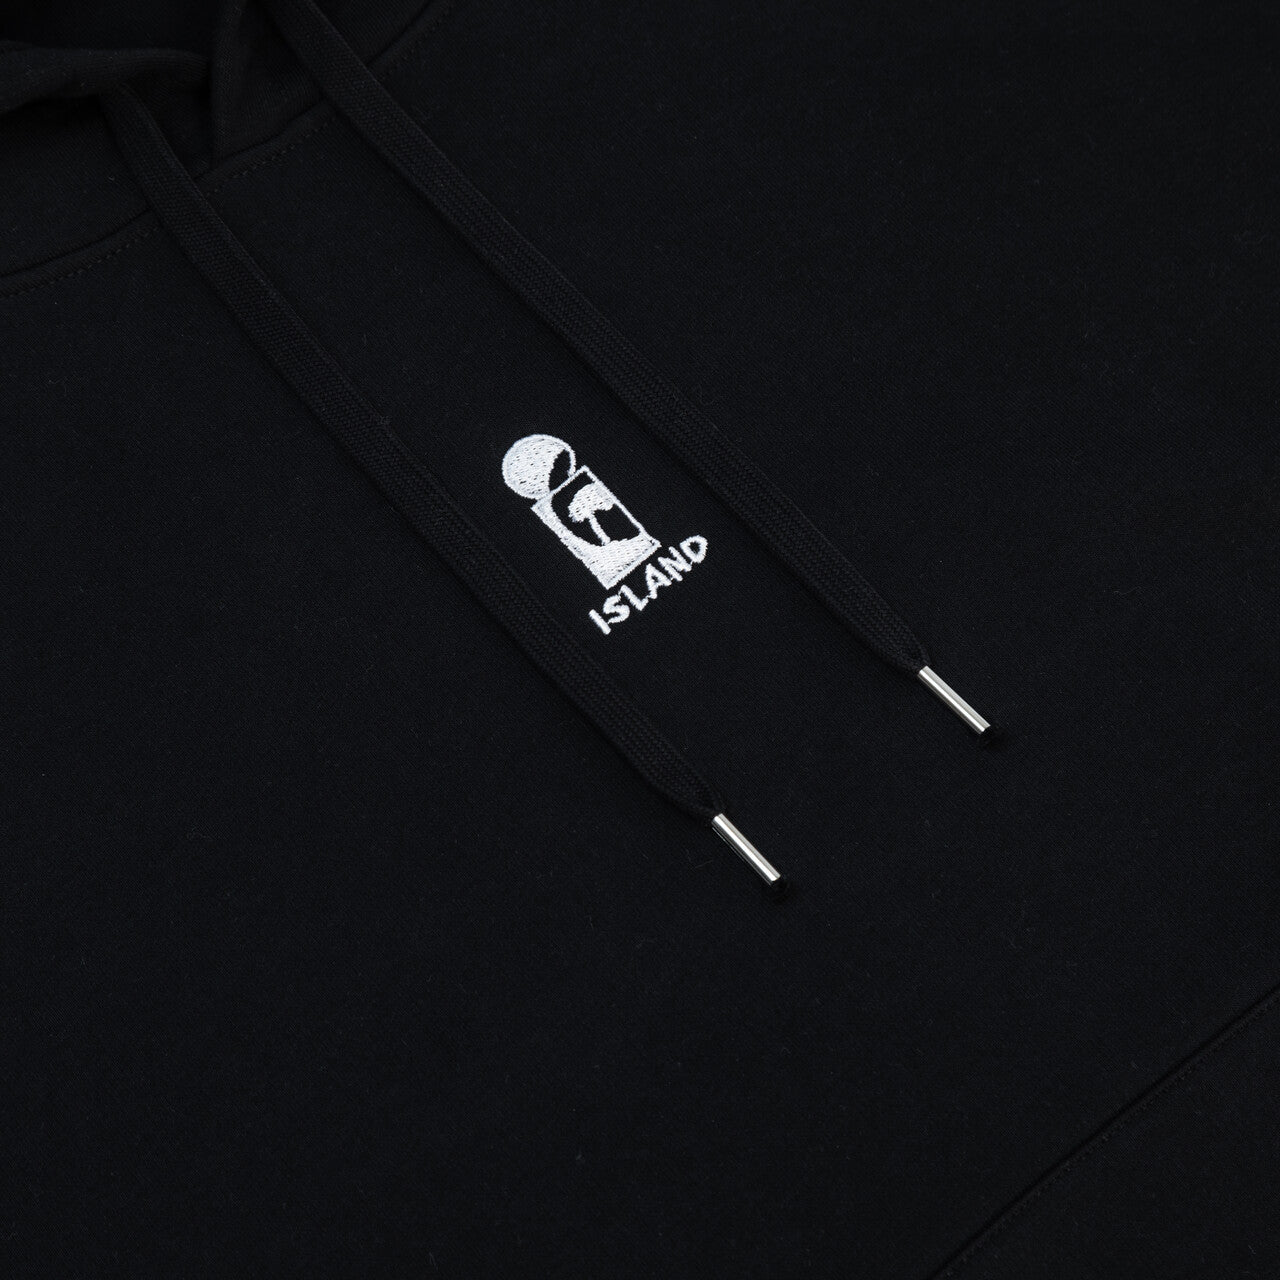 Island Records - Embroidered Logo Black Hoodie